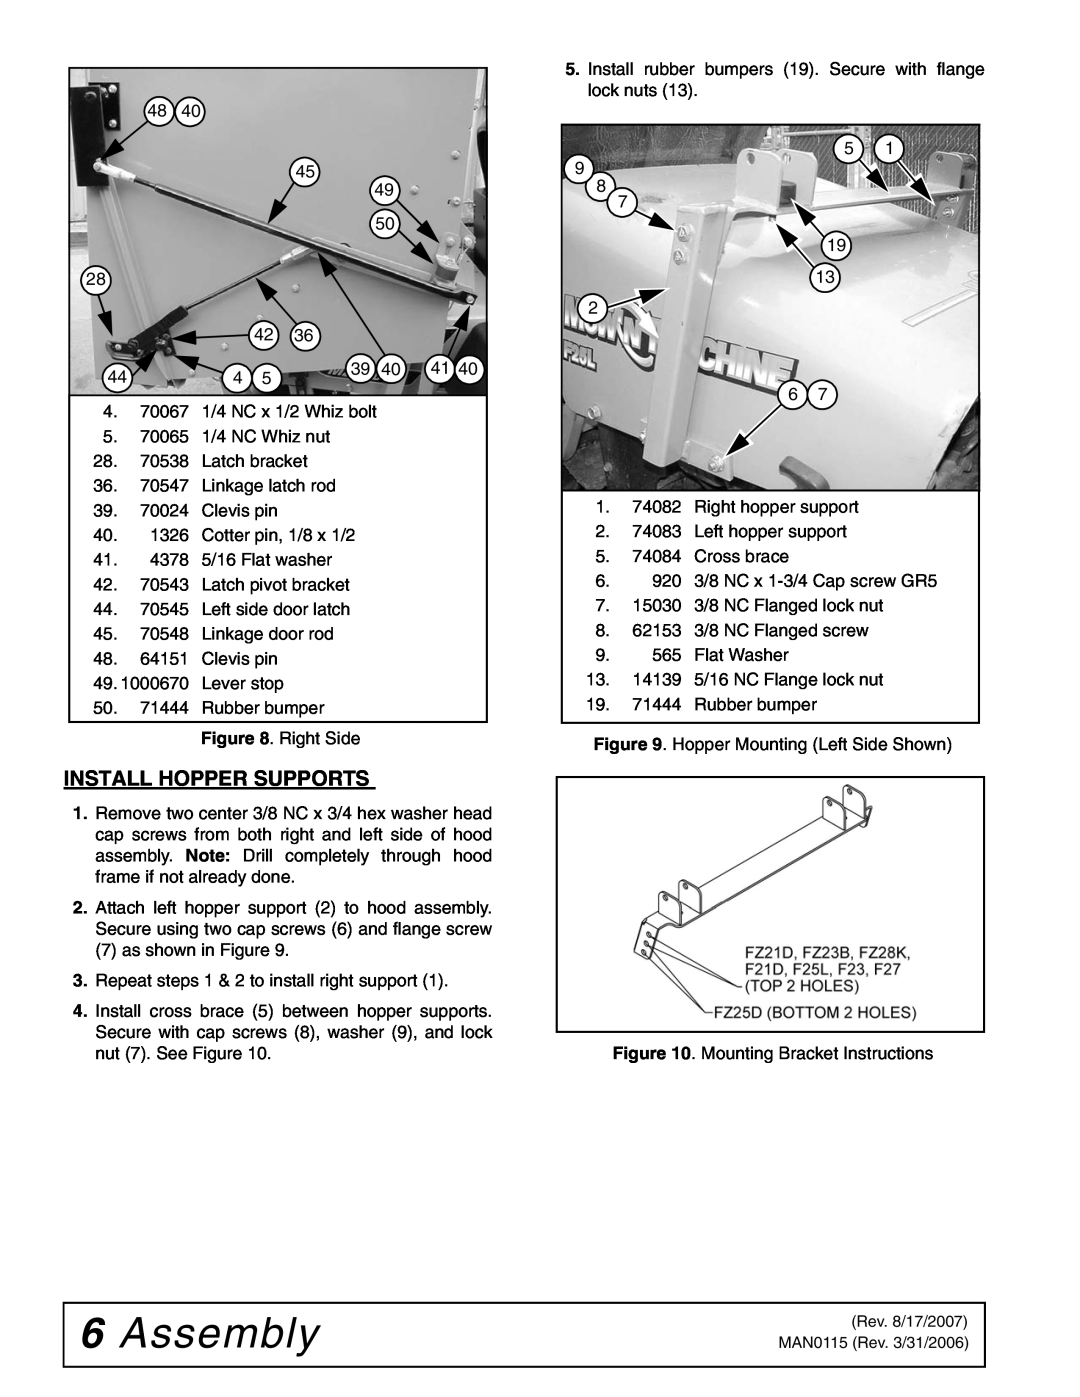 Woods Equipment MAN0115 installation manual 6Assembly, Install Hopper Supports 